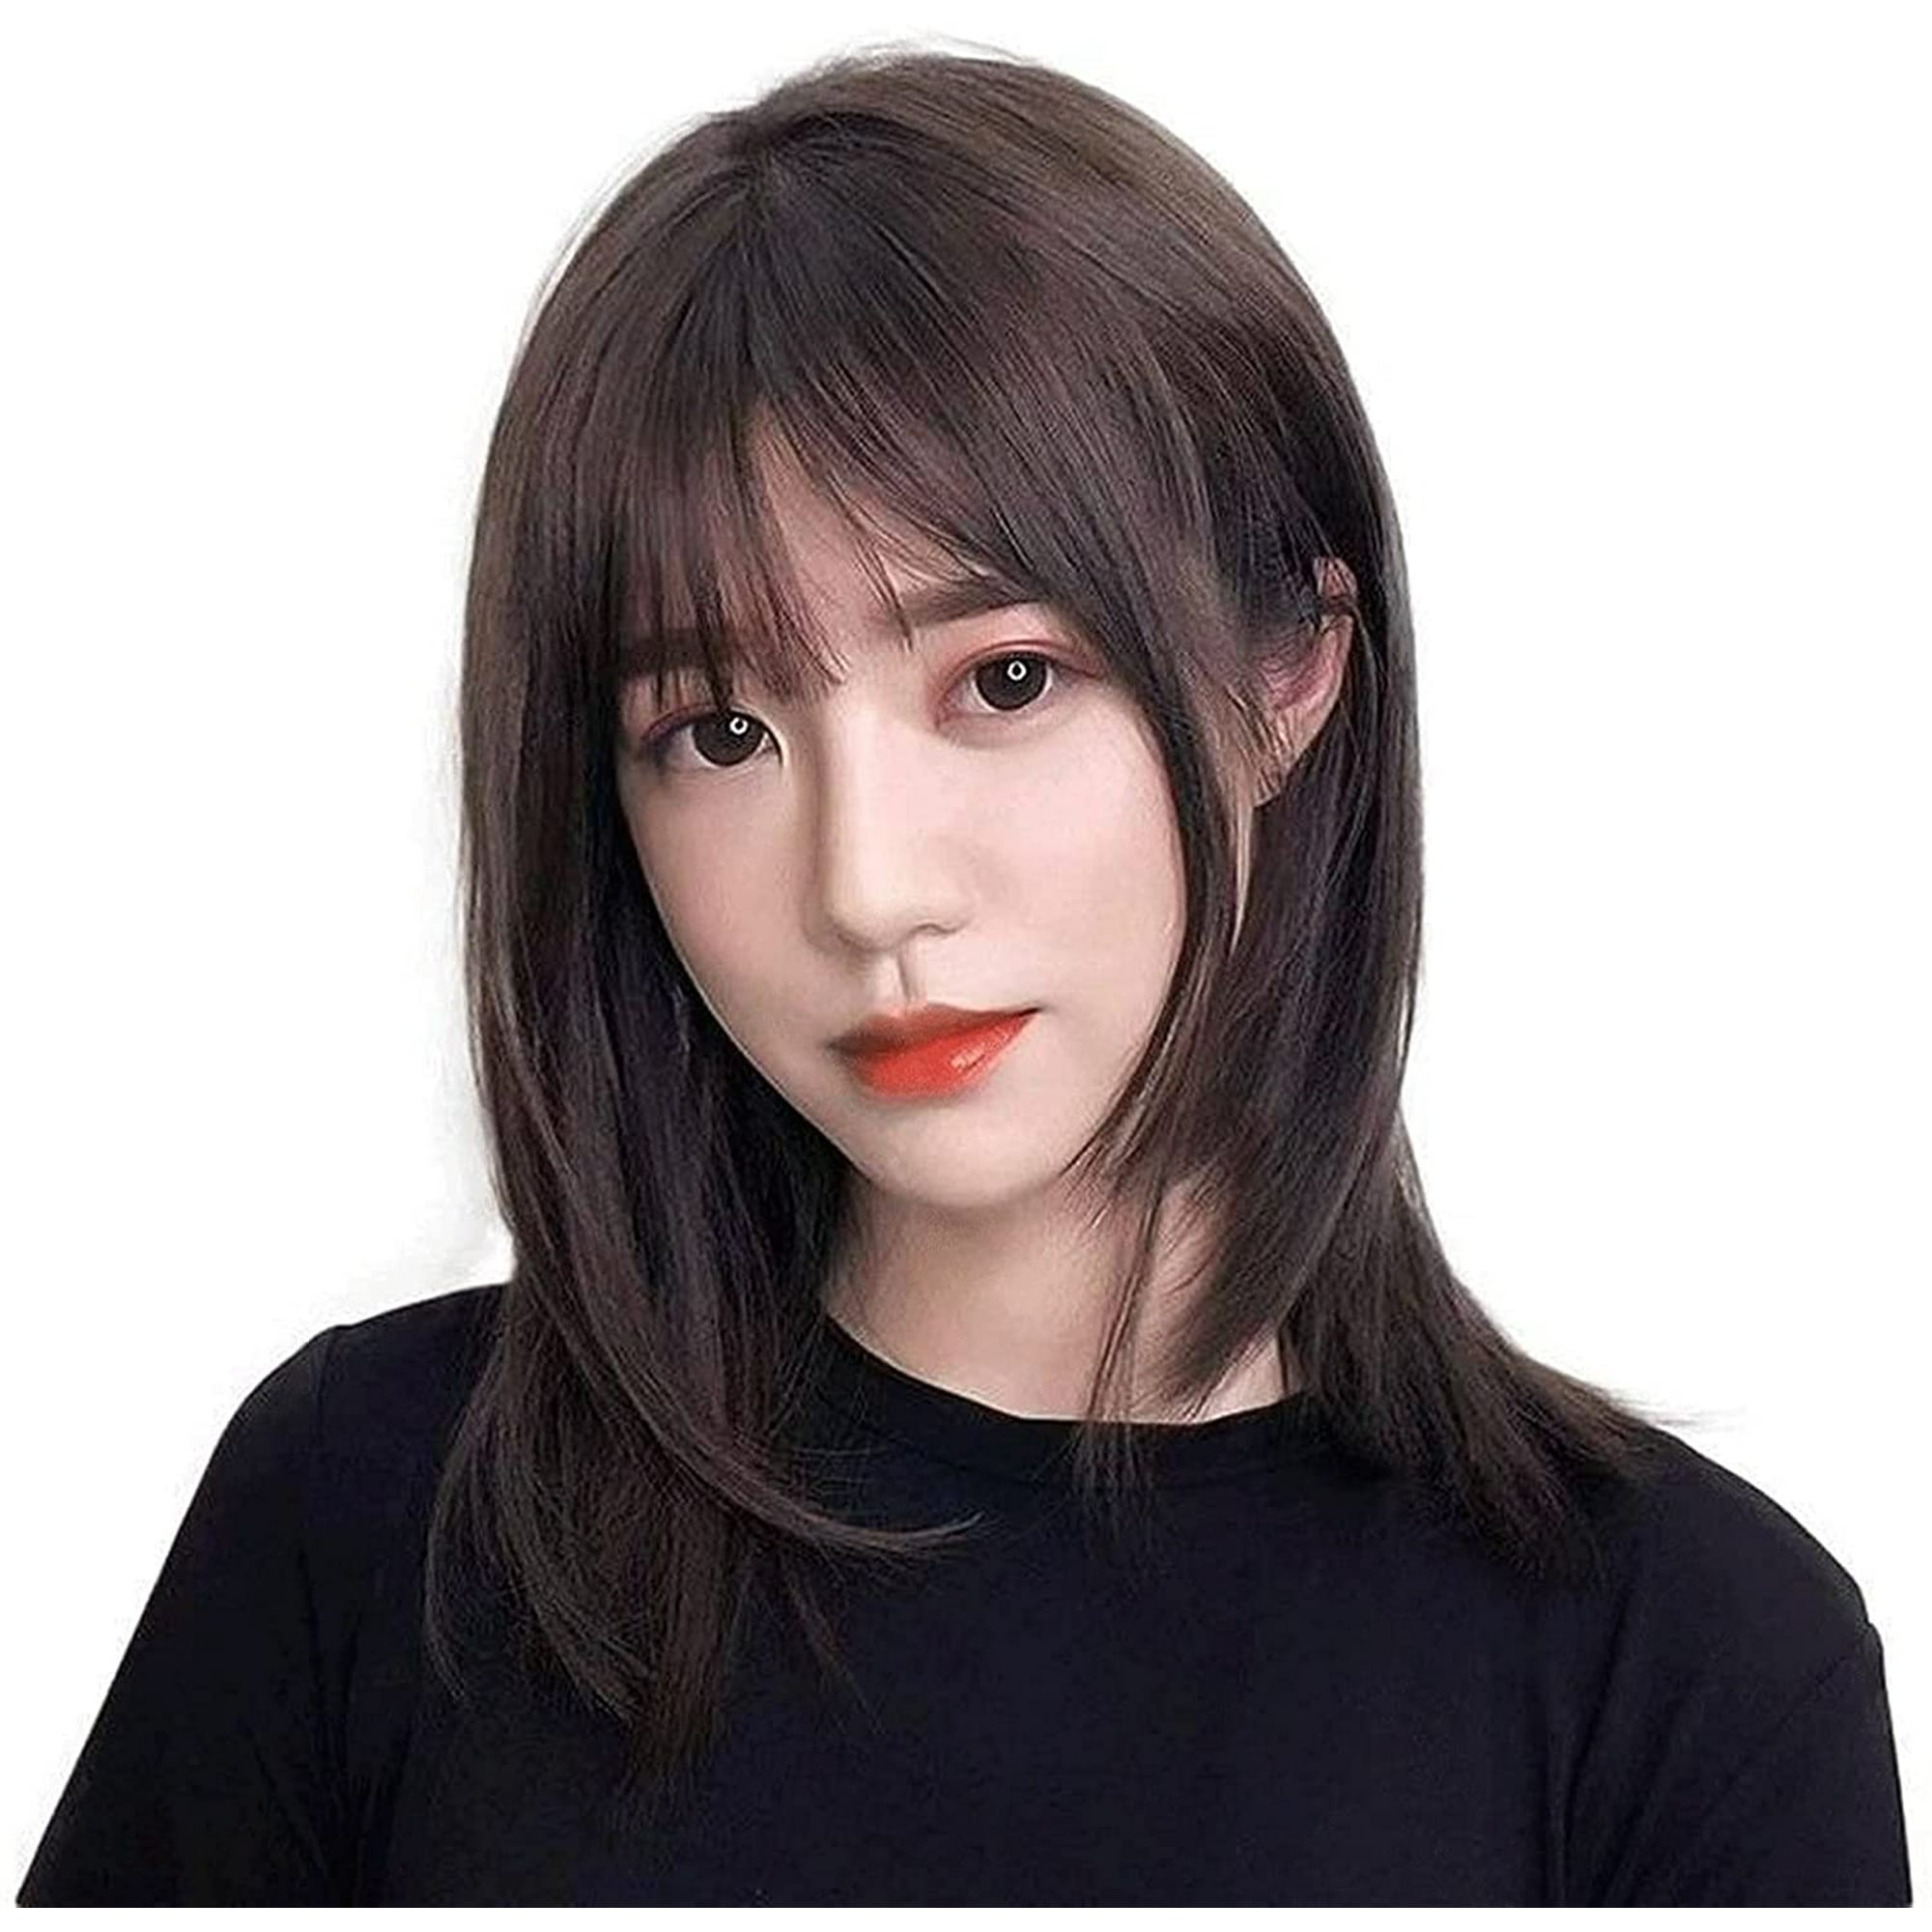 HISRFOCSP Human Hair Wigs Women's Wig Medium Long Straight Hair Full Hair  Heat Resistant Wig Daily Wear Wig Modified Round Face Wig for Party,  Cosplay, Dating, Work, Travel, Casual Freetress Wigs |